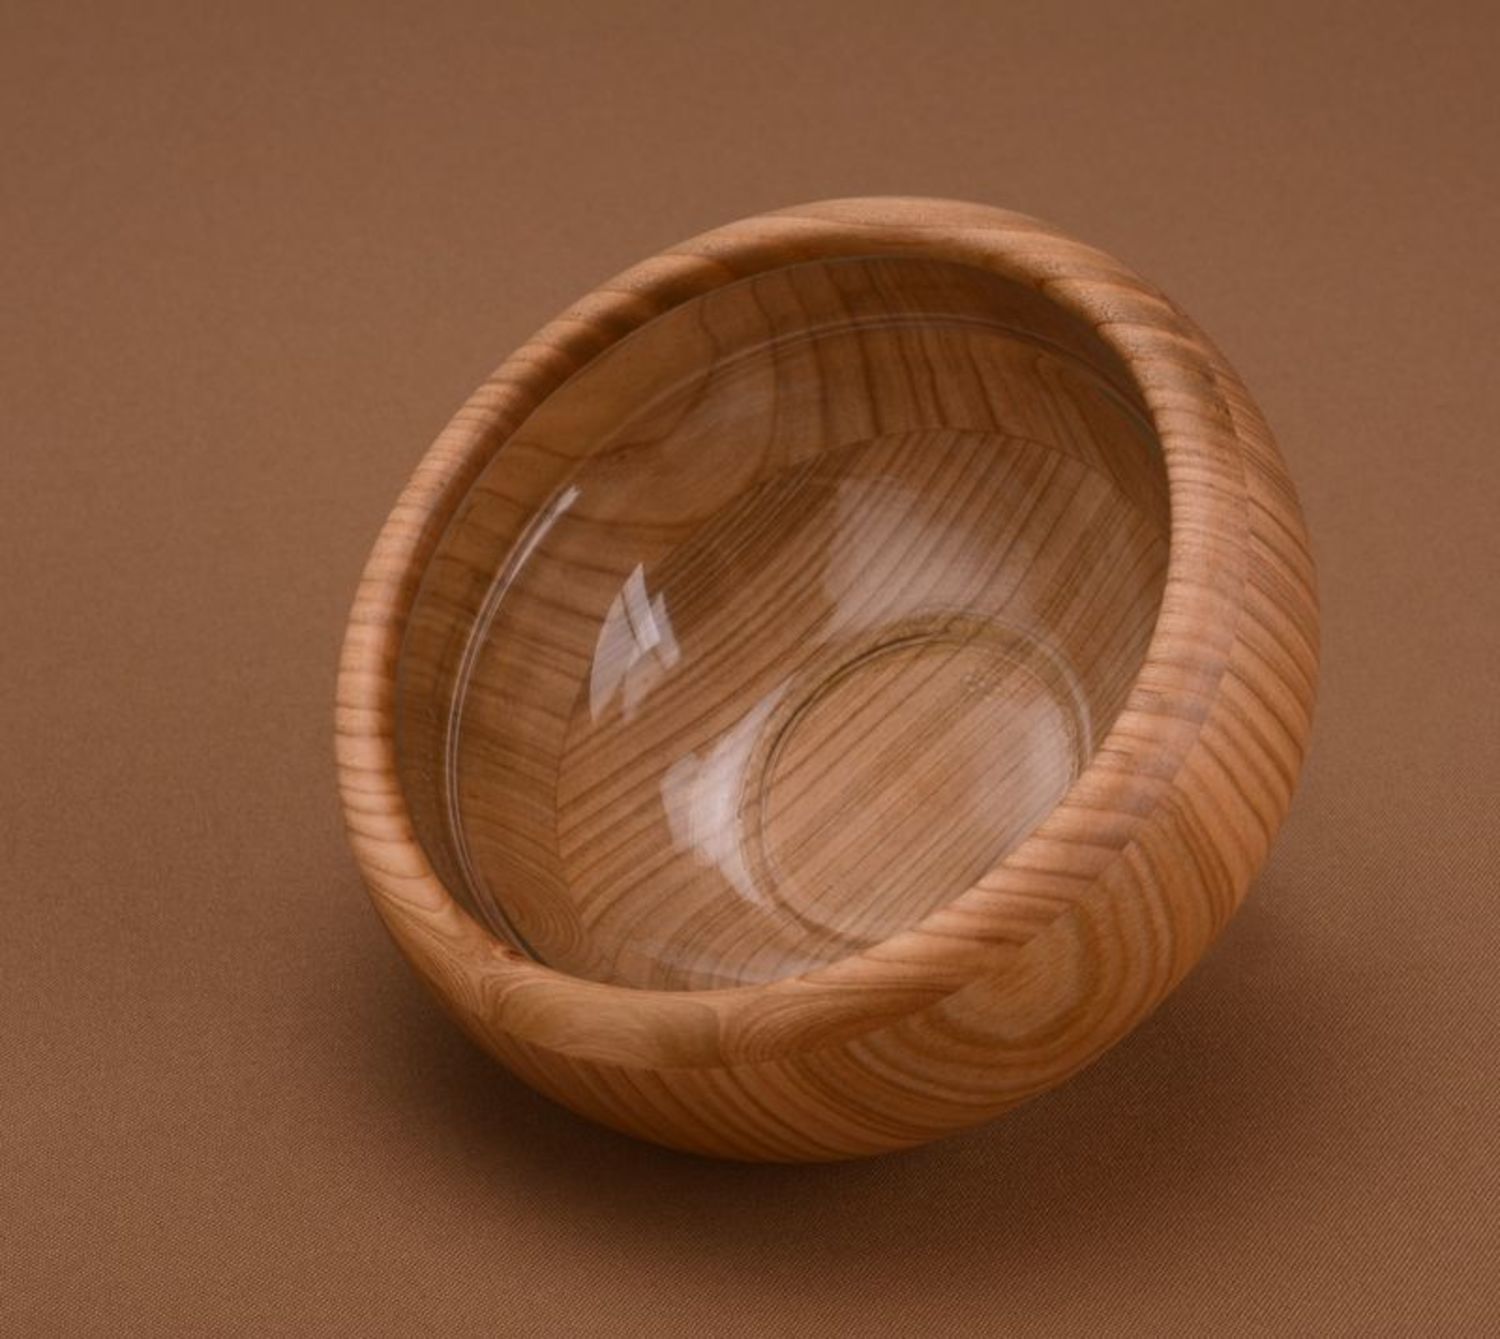 Wooden bowl for food photo 2